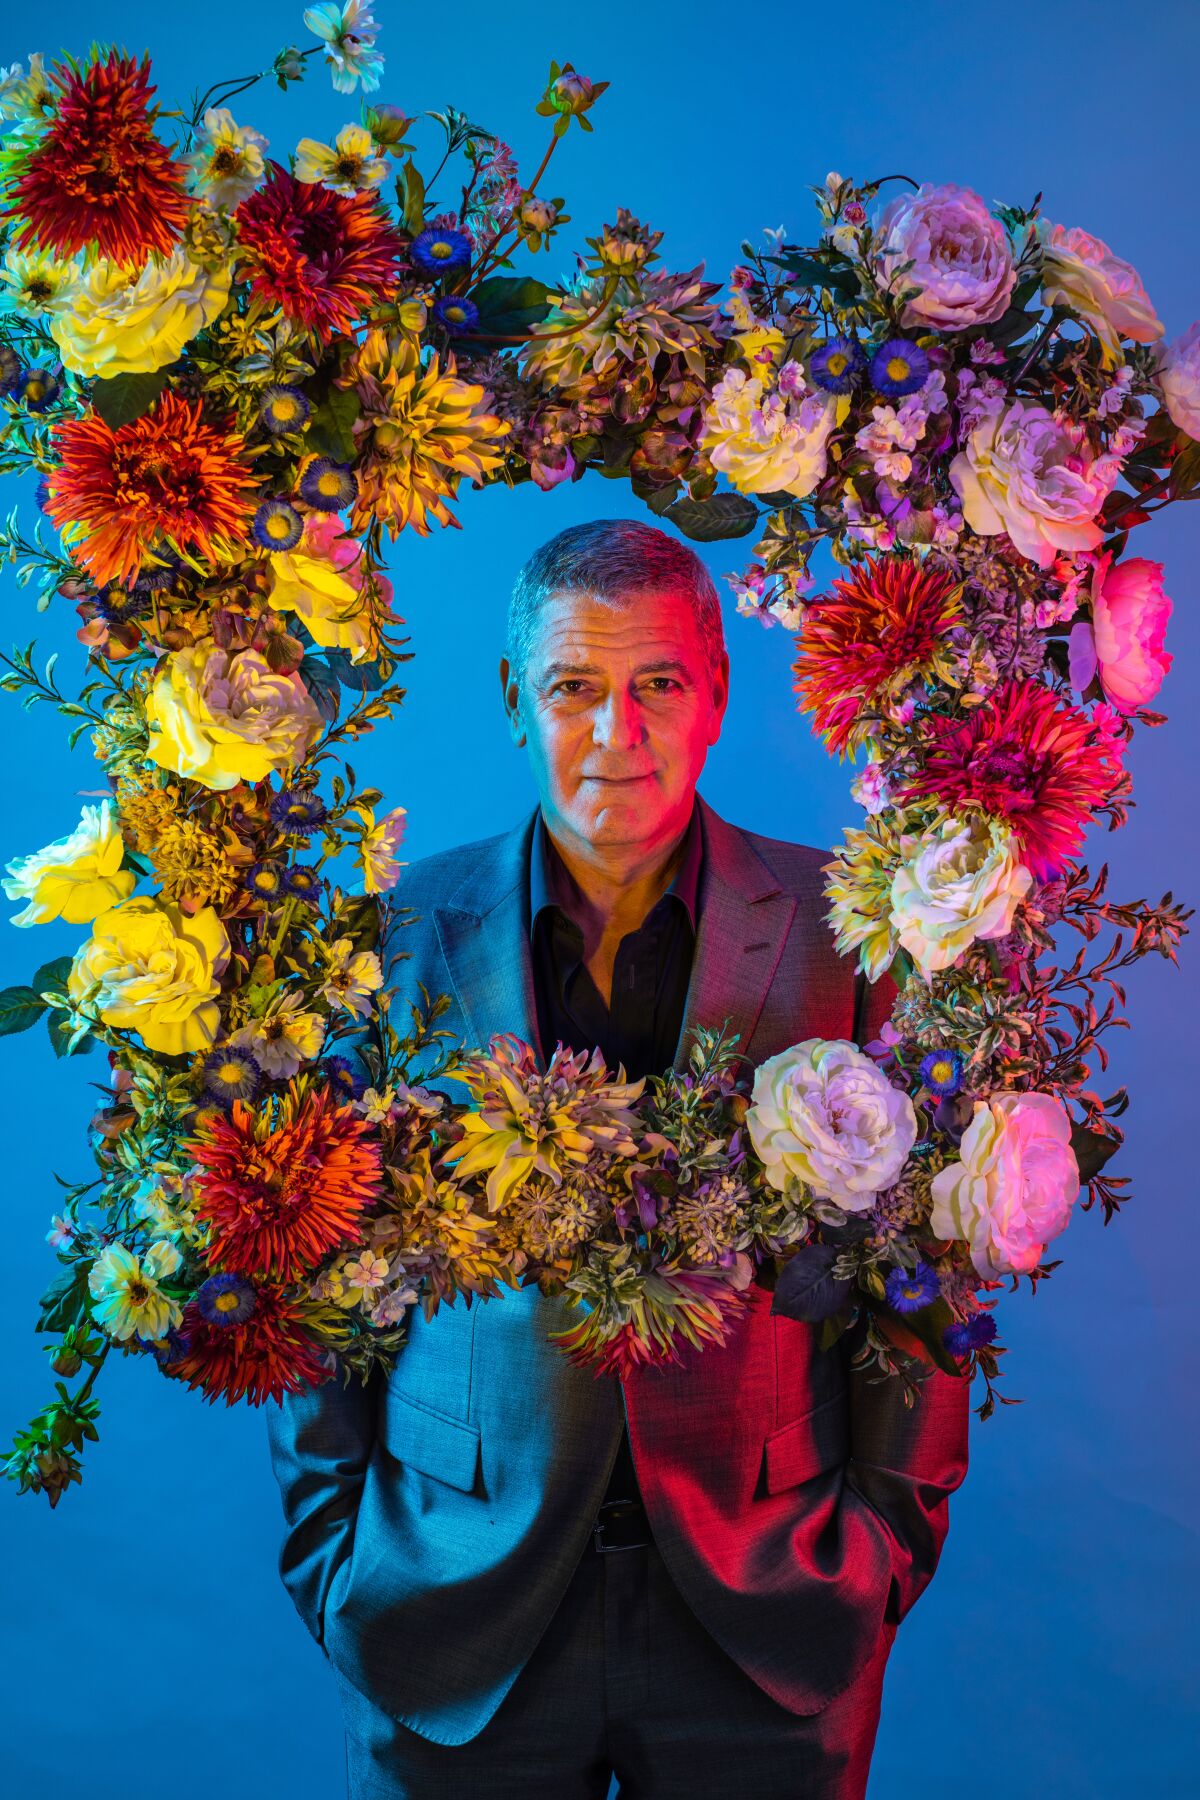 Actor and director George Clooney